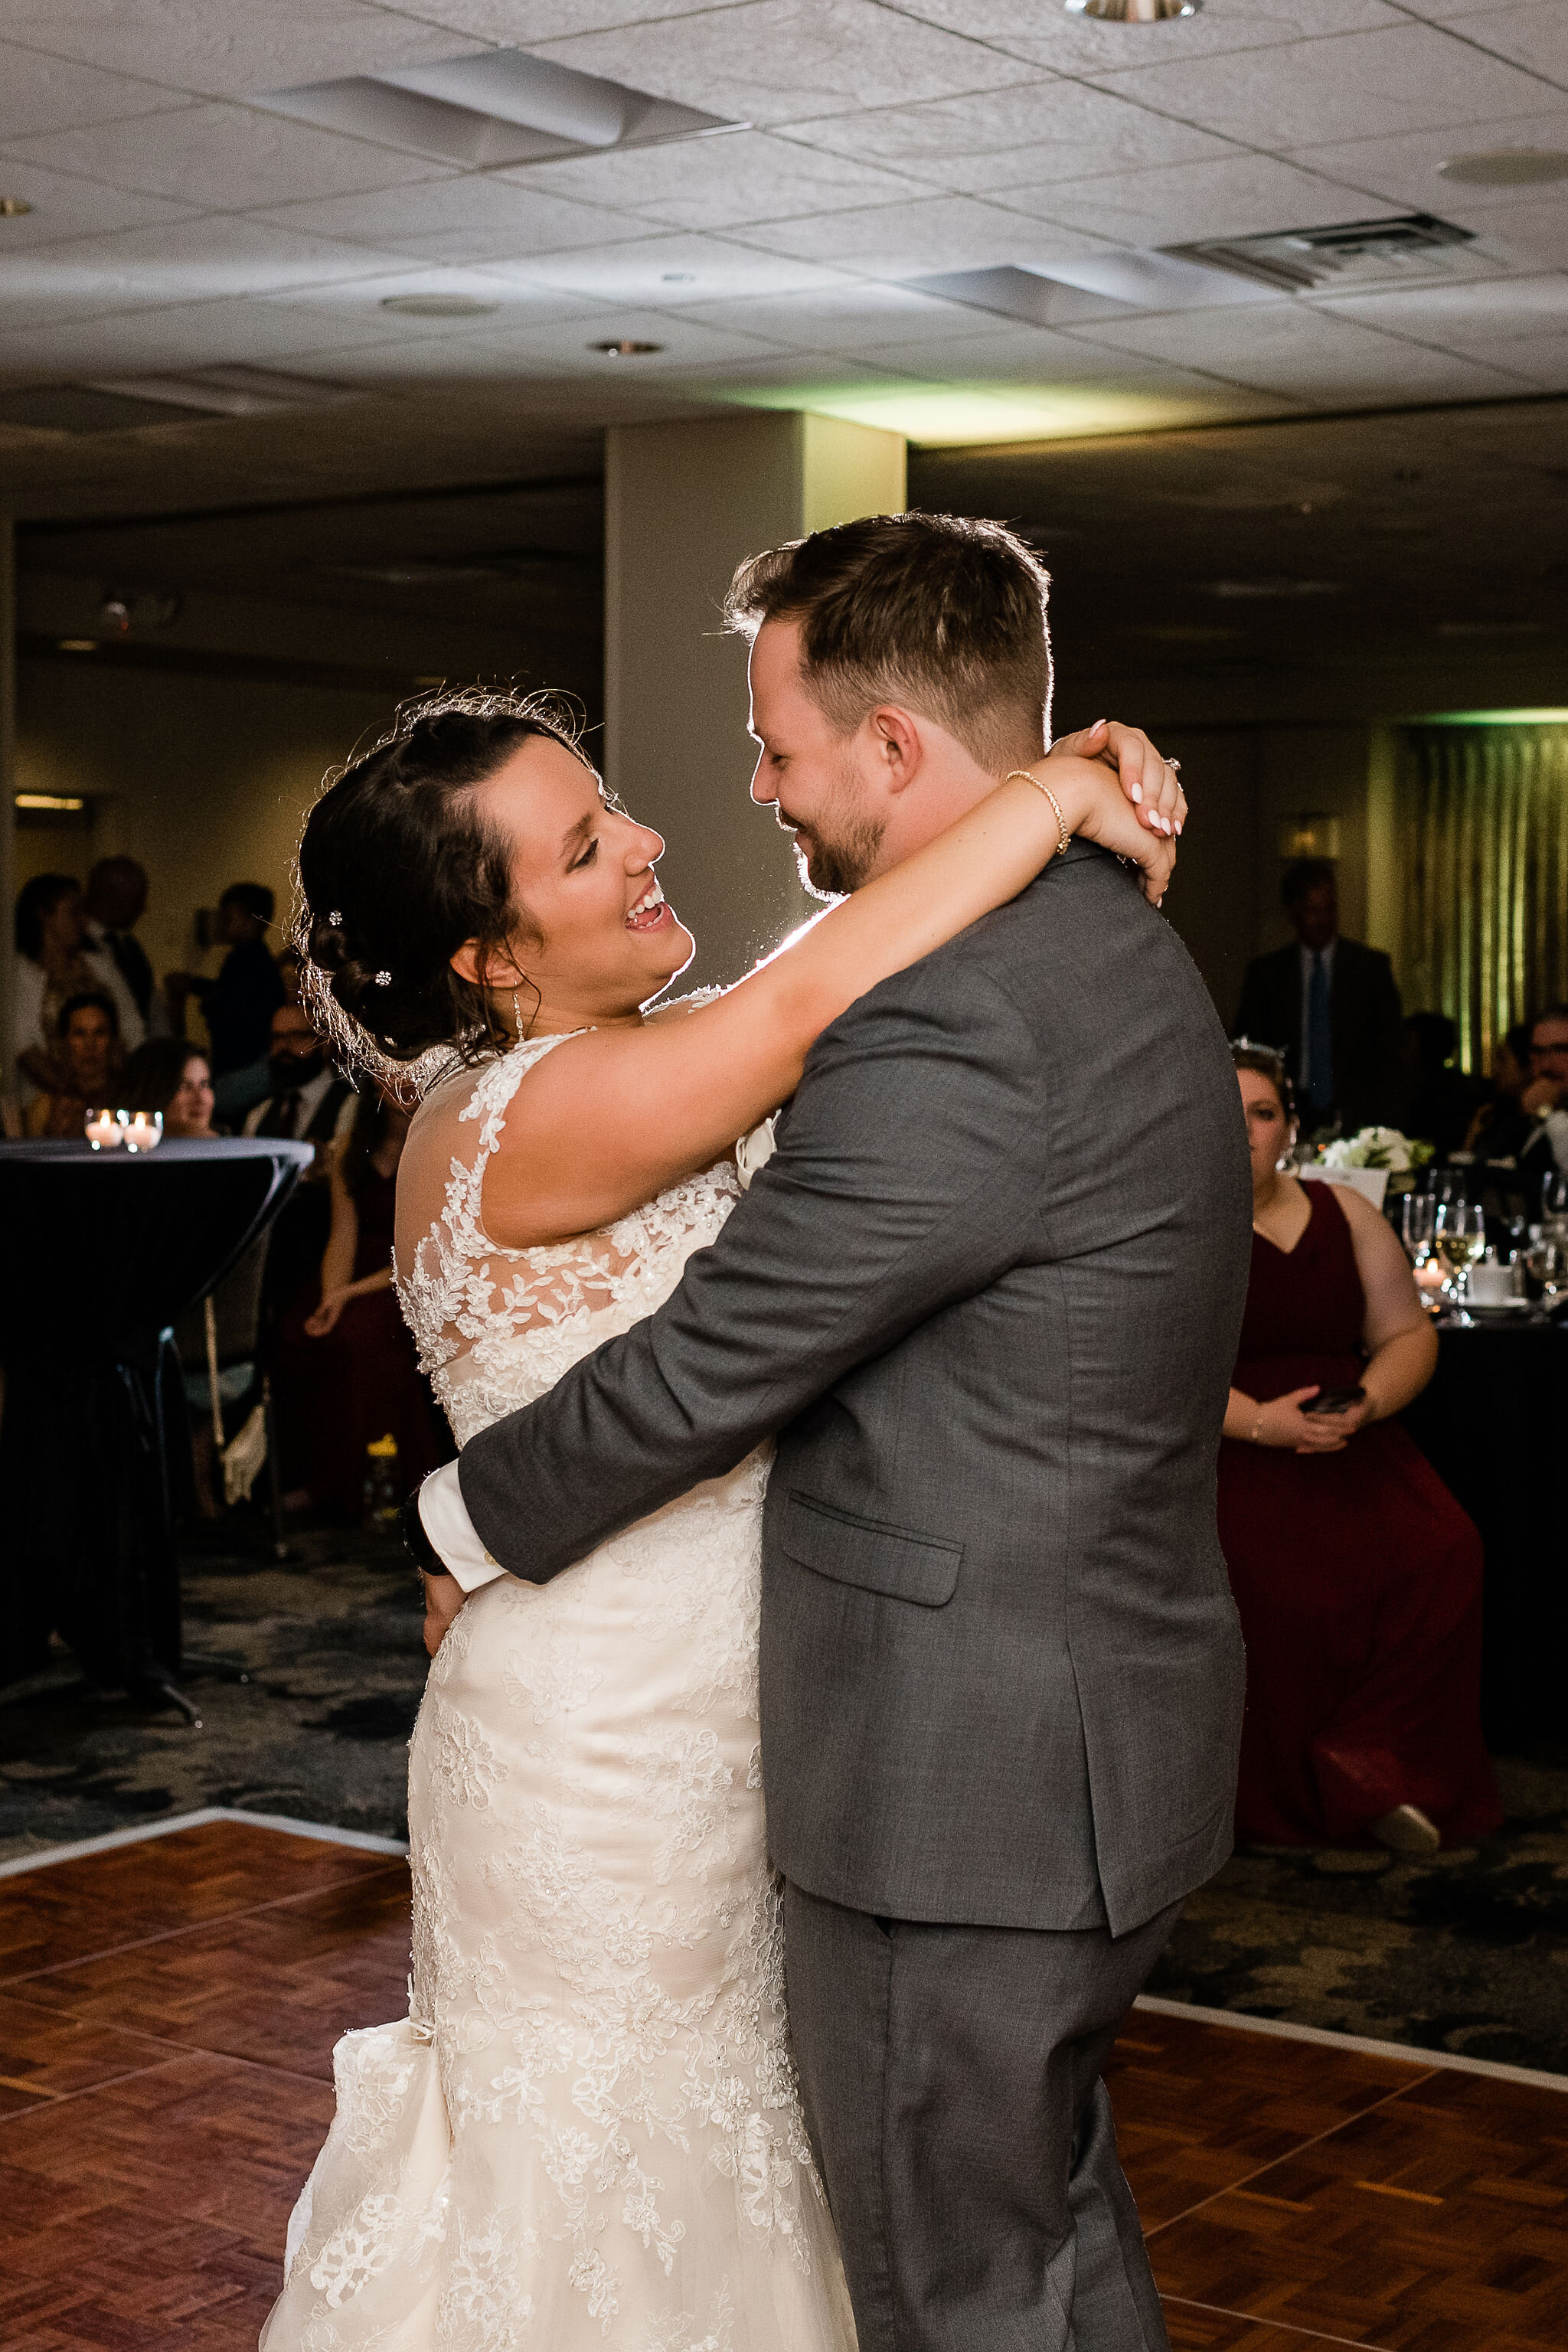 Bride and groom's first dance